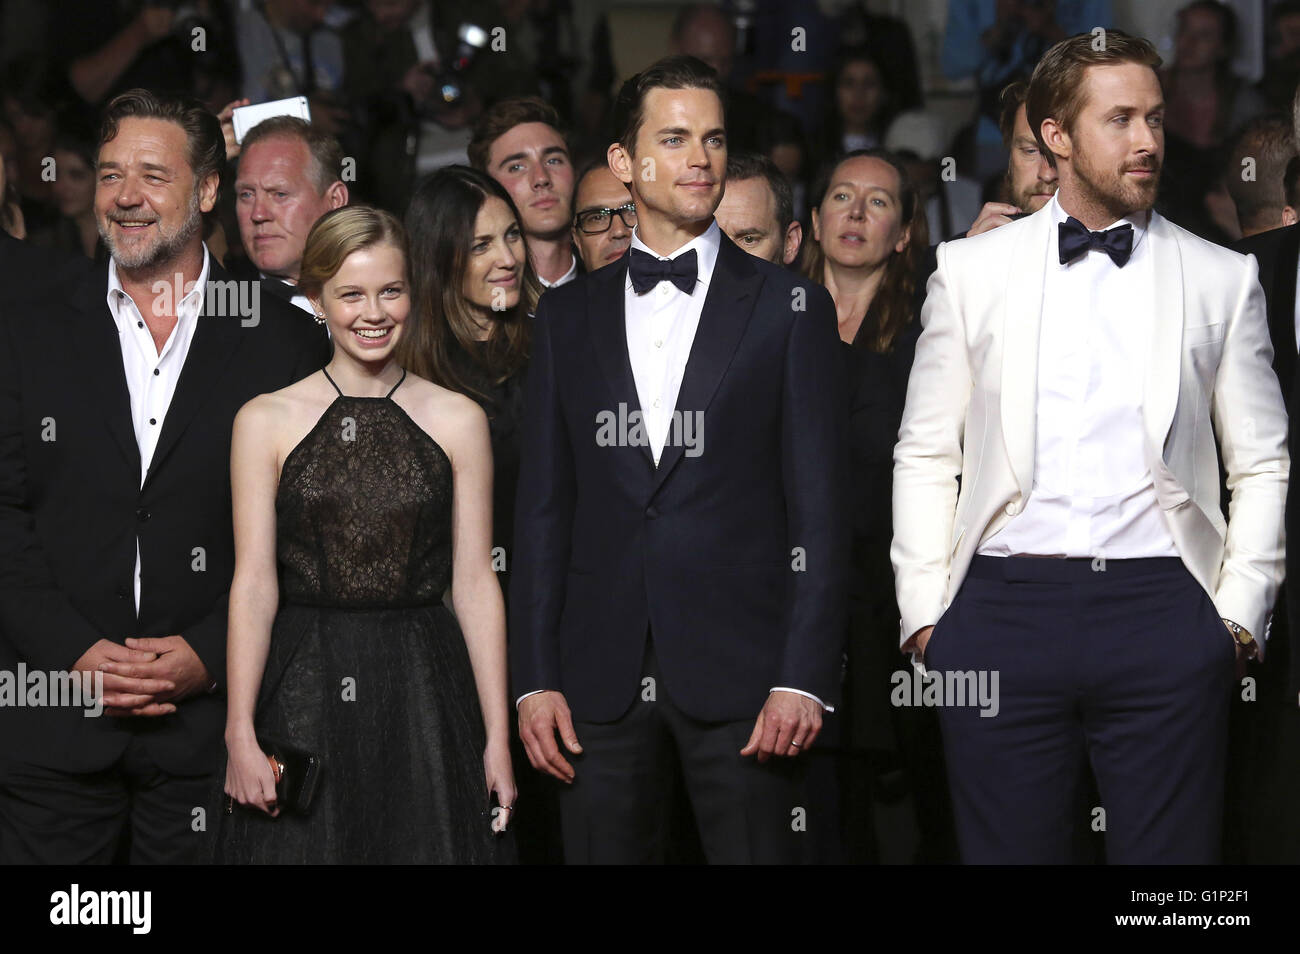 Russell Crowe, Angourie Rice, Matt Bomer and Ryan Gosling attending the  'The Nice Guys' premiere during the 69th Cannes Film Festival at the Palais  des Festivals in Cannes on May 15, 2016